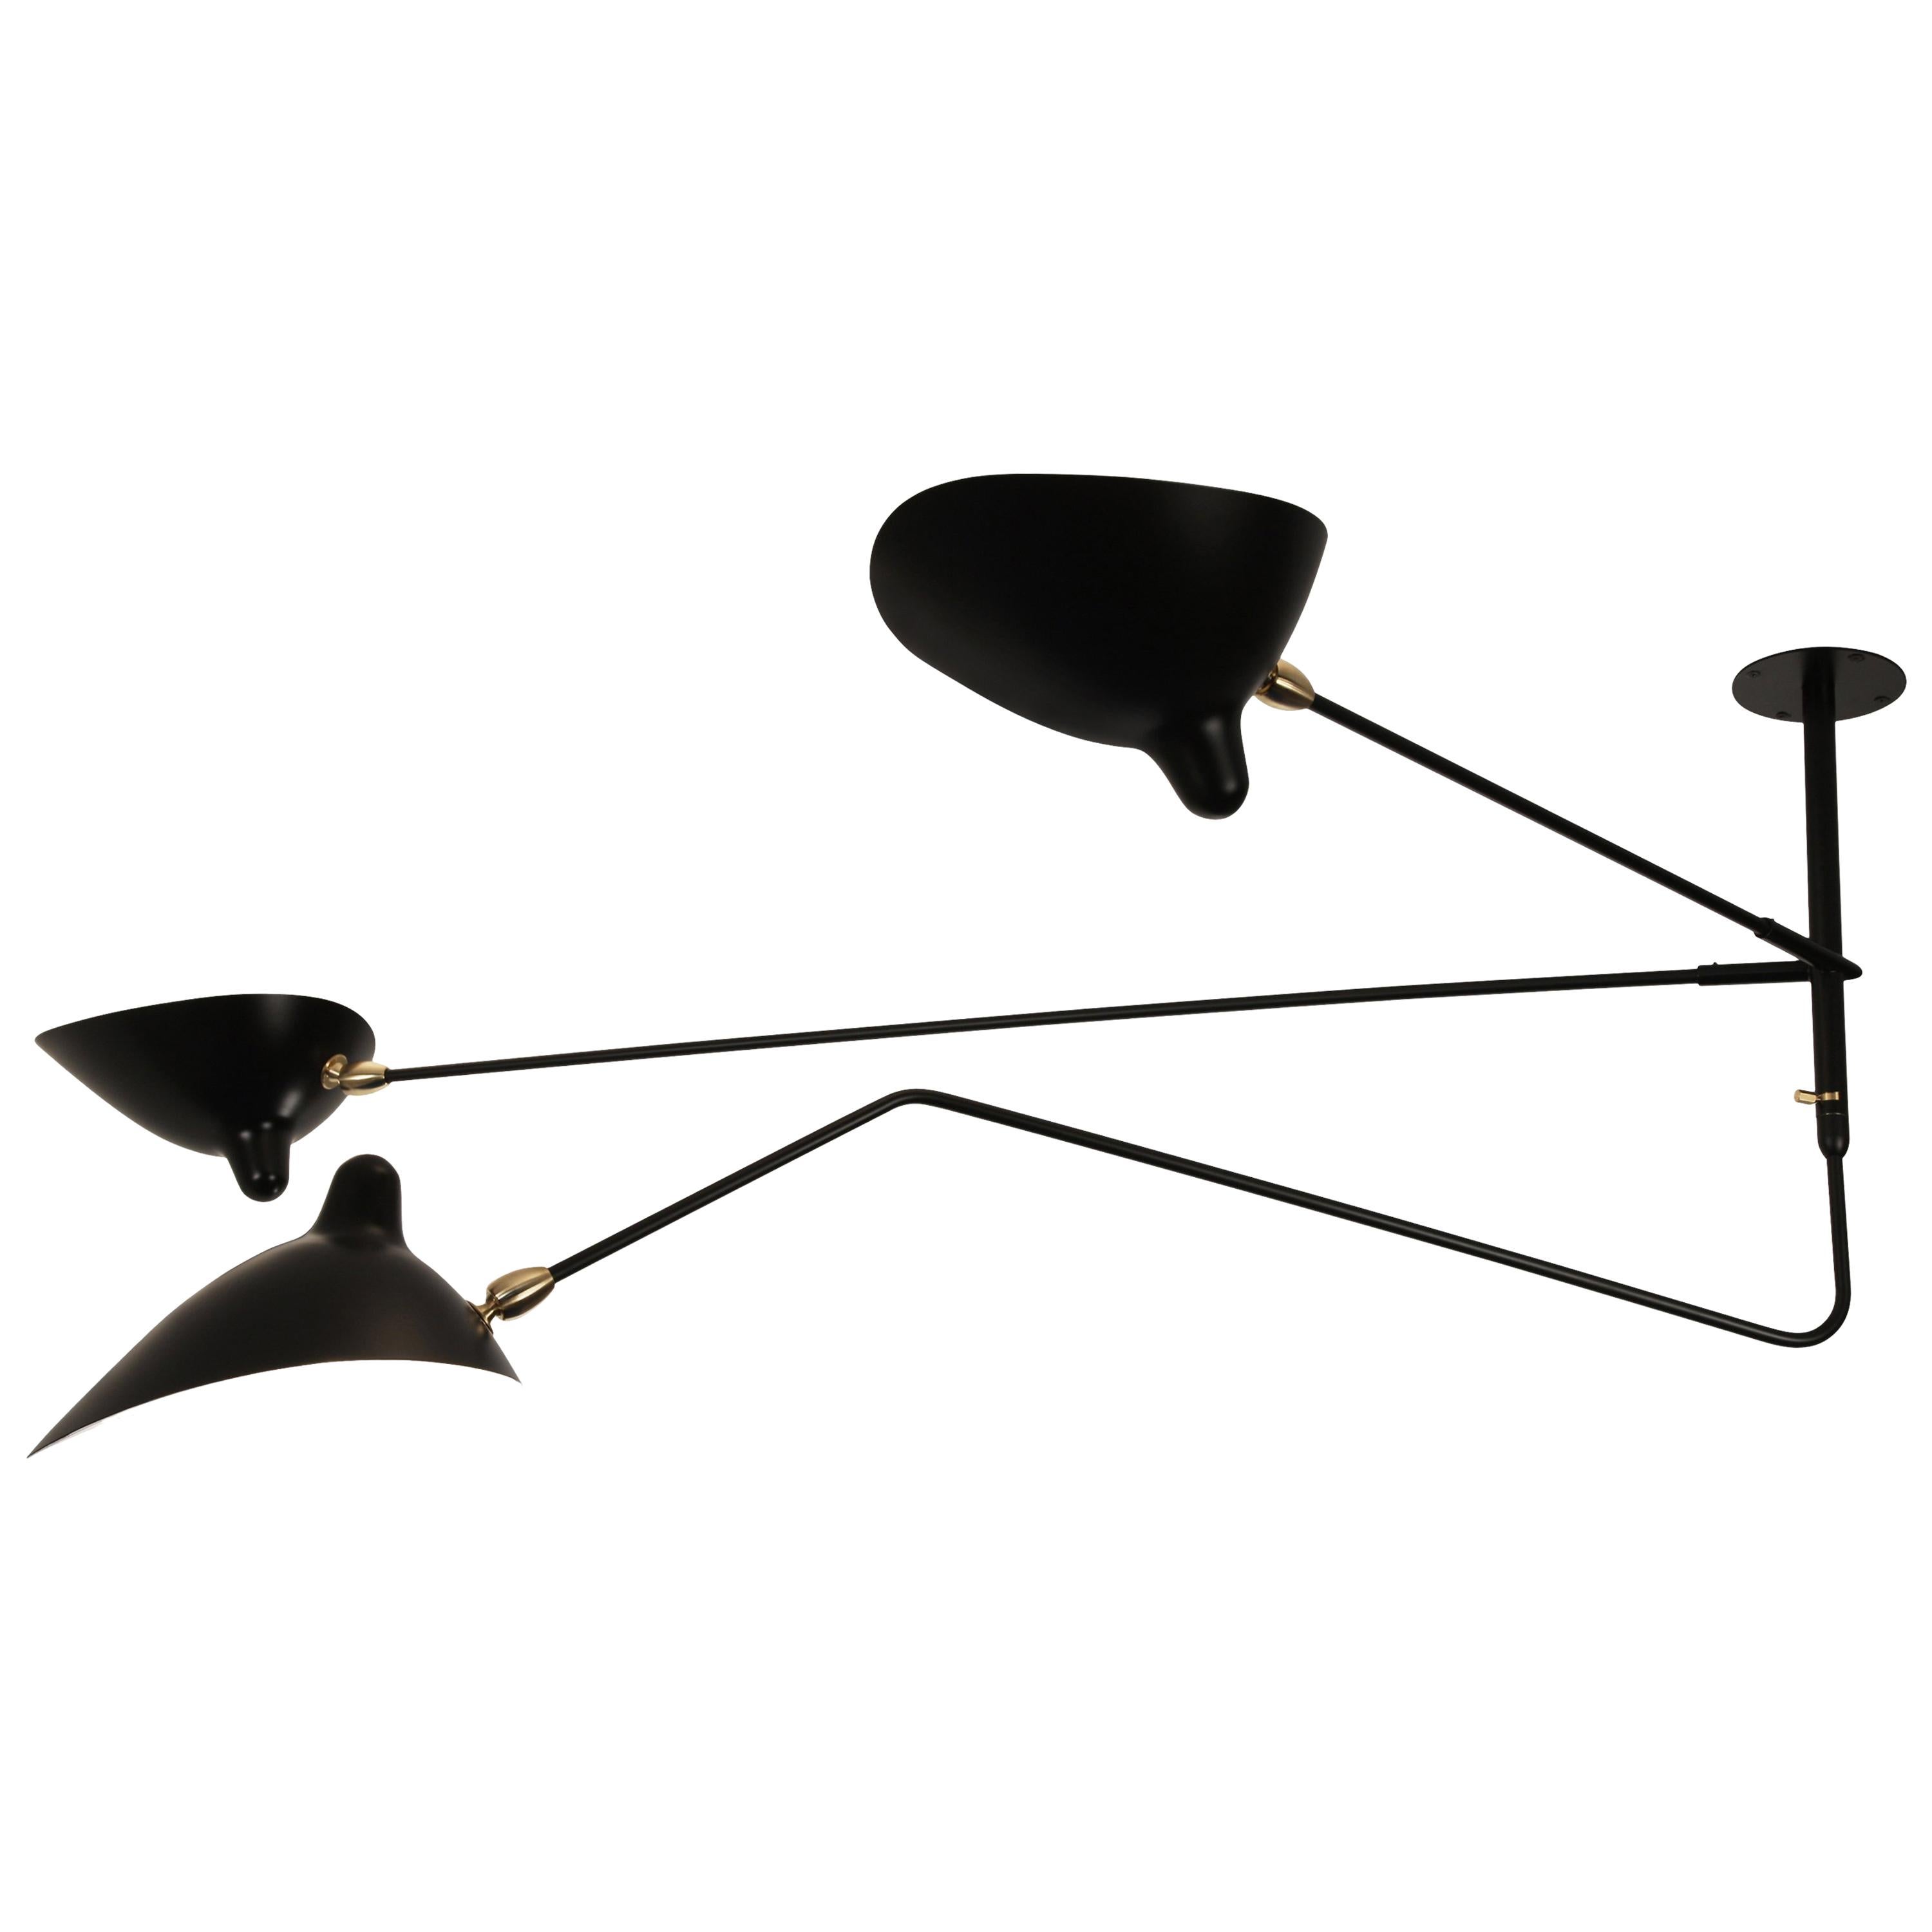 Serge Mouille Three Arms, One Rotating Ceiling Sconce Lamp